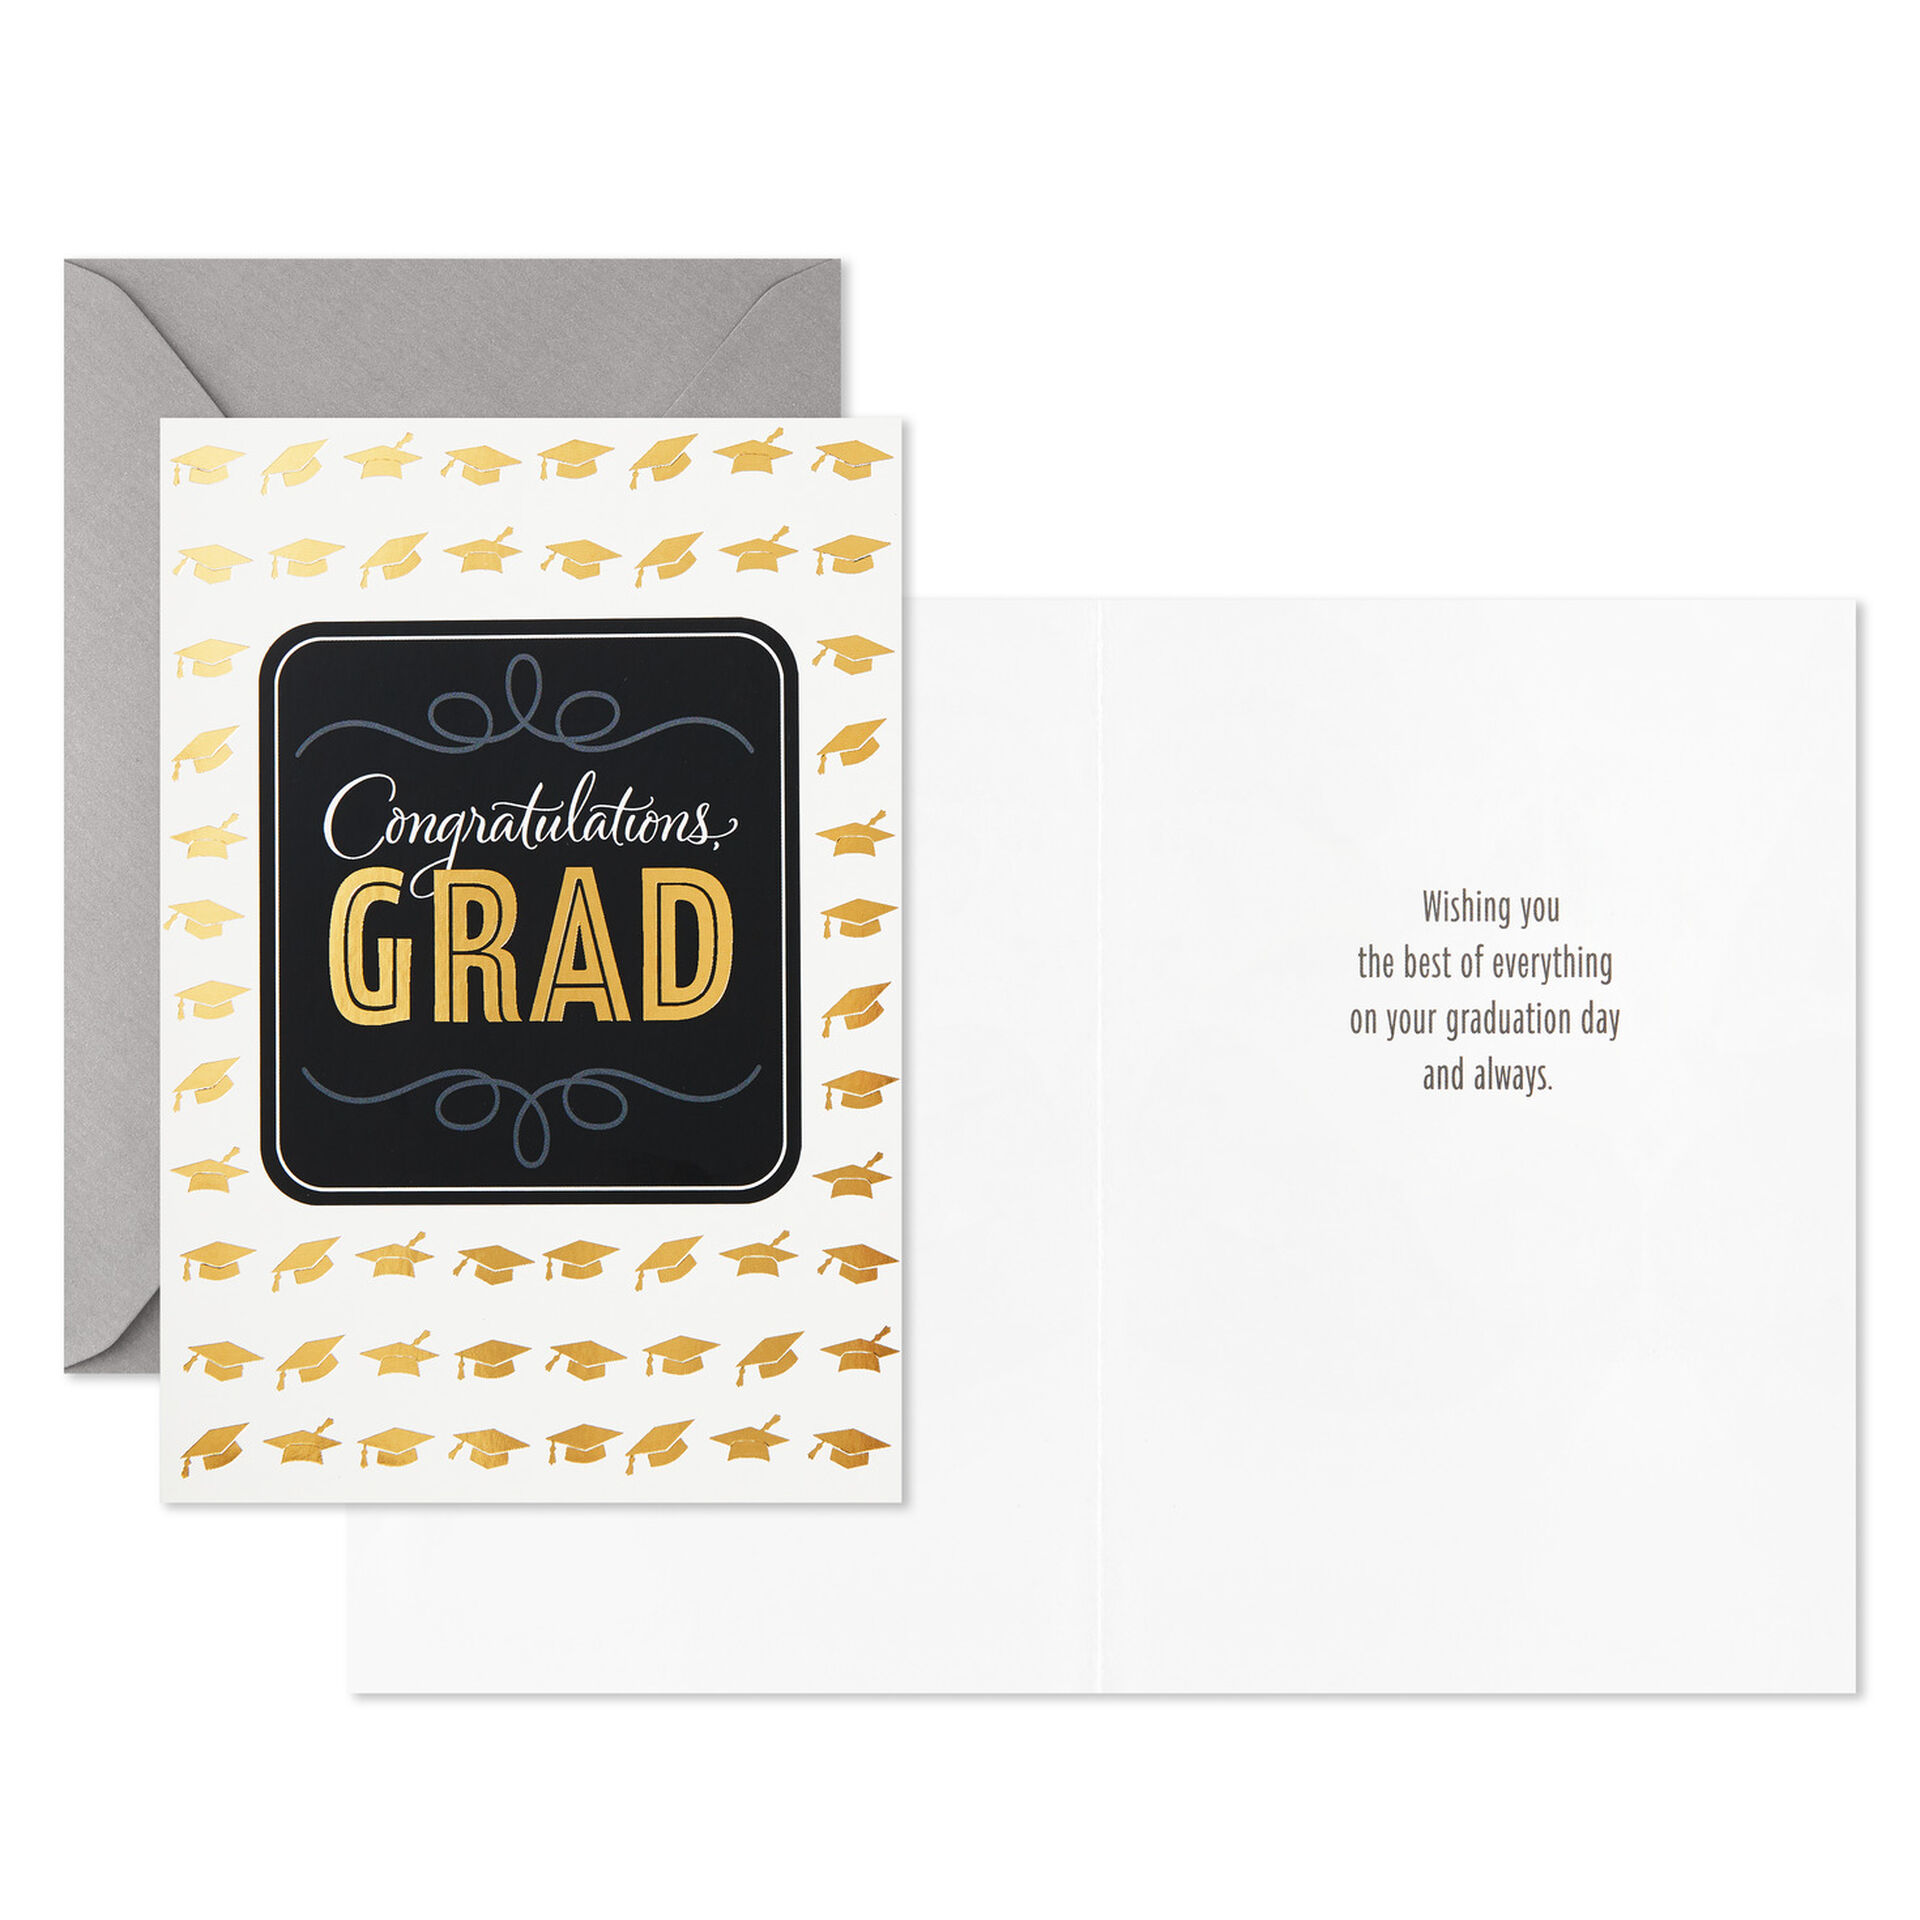 Assorted-Graduation-Cards-With-Gold-Foil-Bulk-Pack_5GEY2010_04